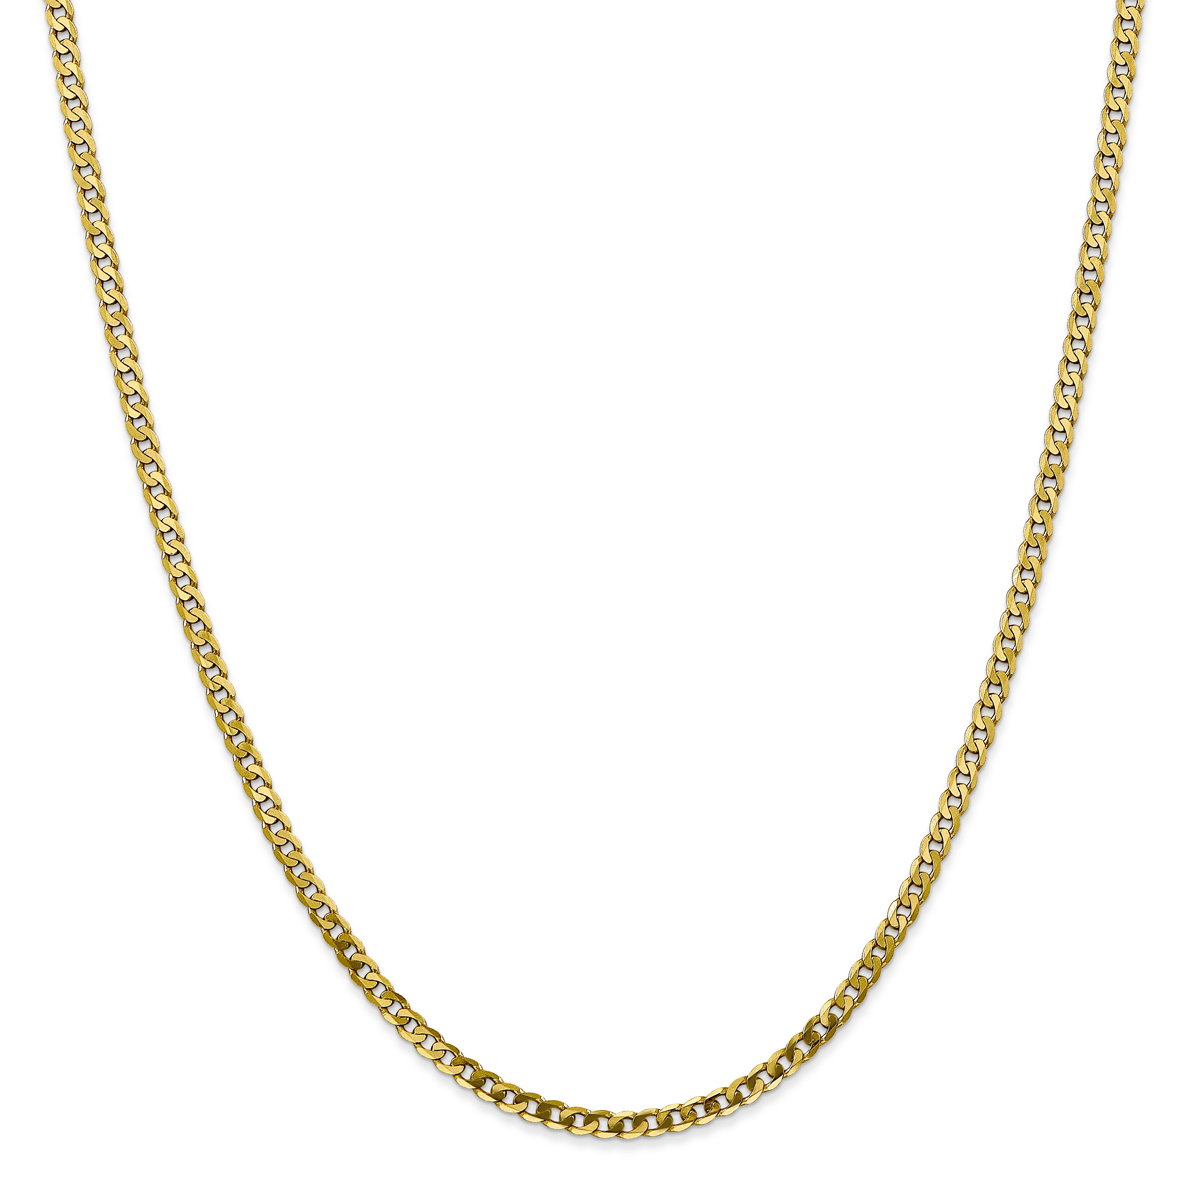 Unisex Gold Classics(tm) 10kt. 2.9mm 16in. Beveled Chain Necklace